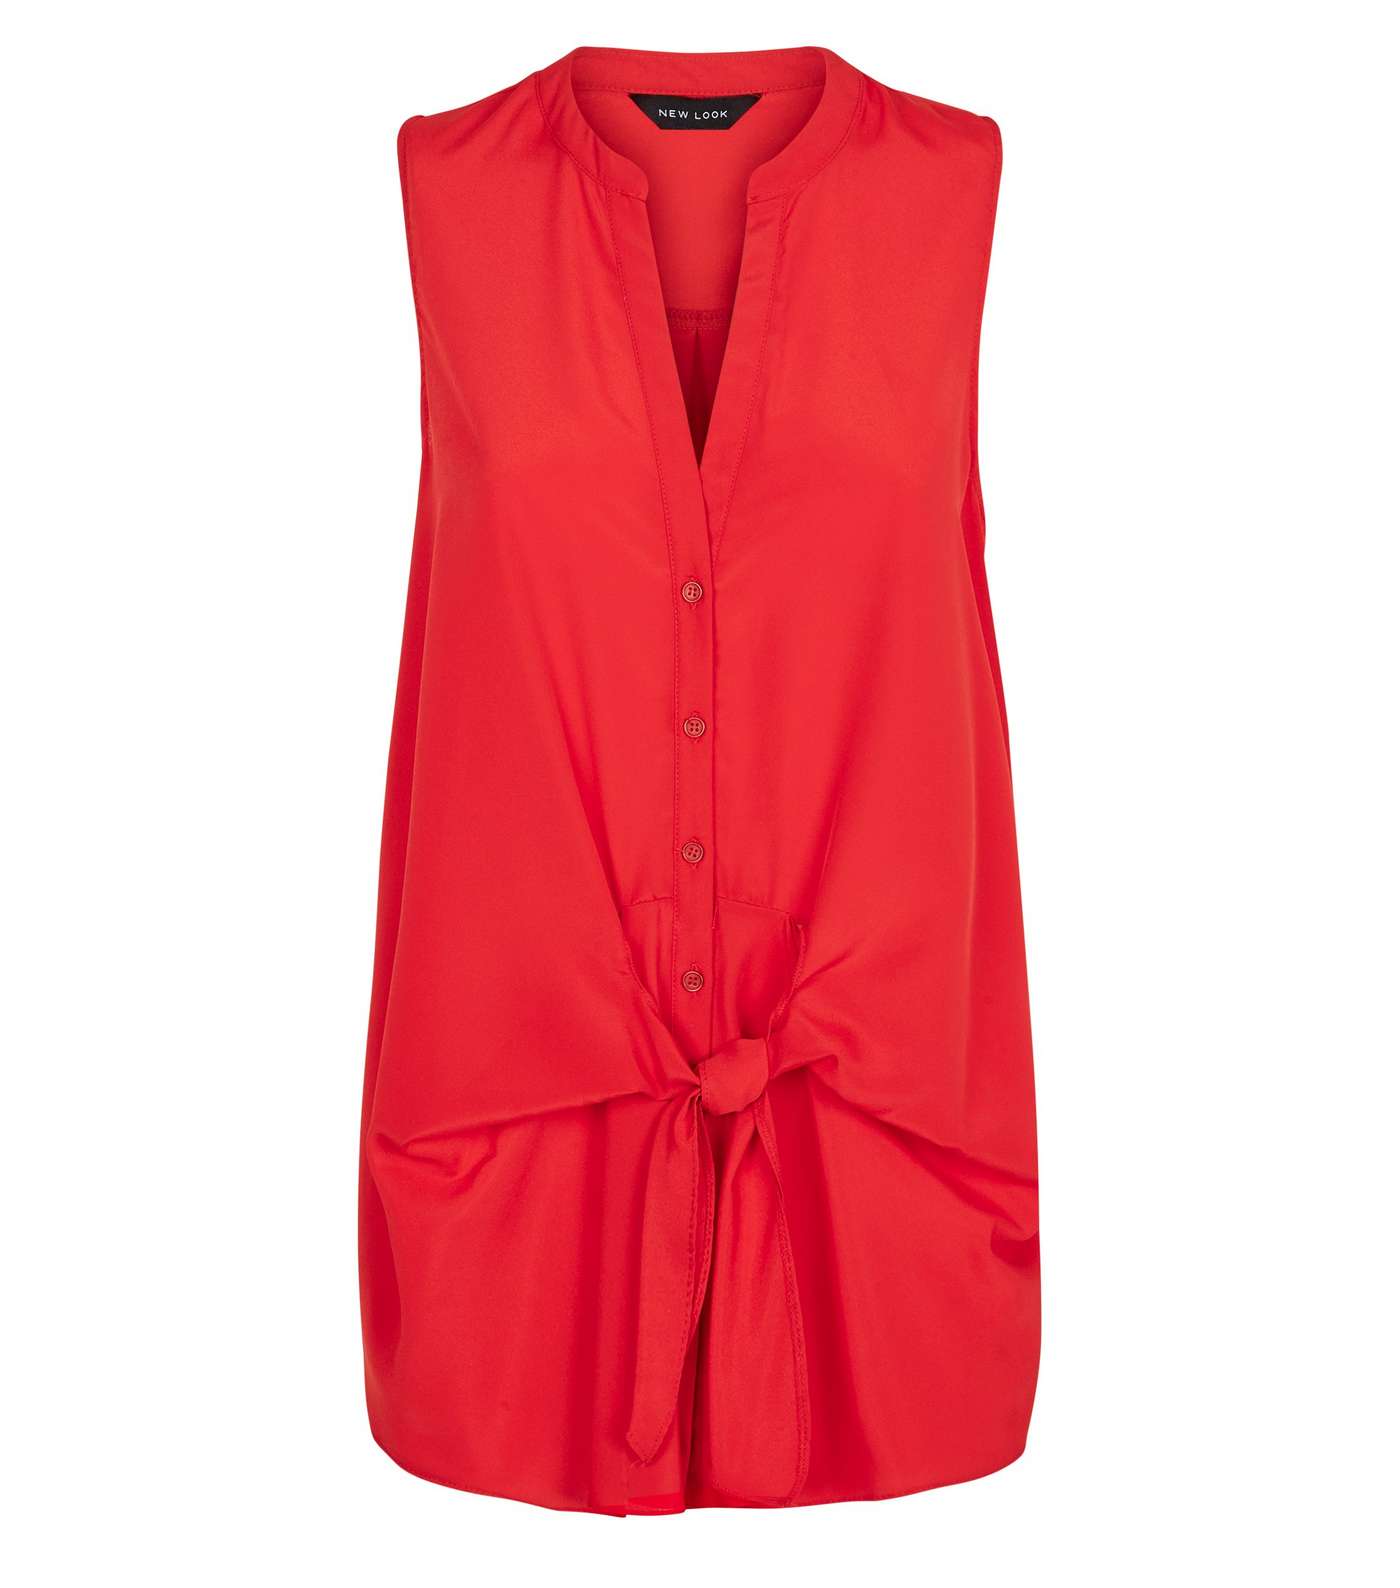 Red Tie Front Sleeveless Shirt Image 4